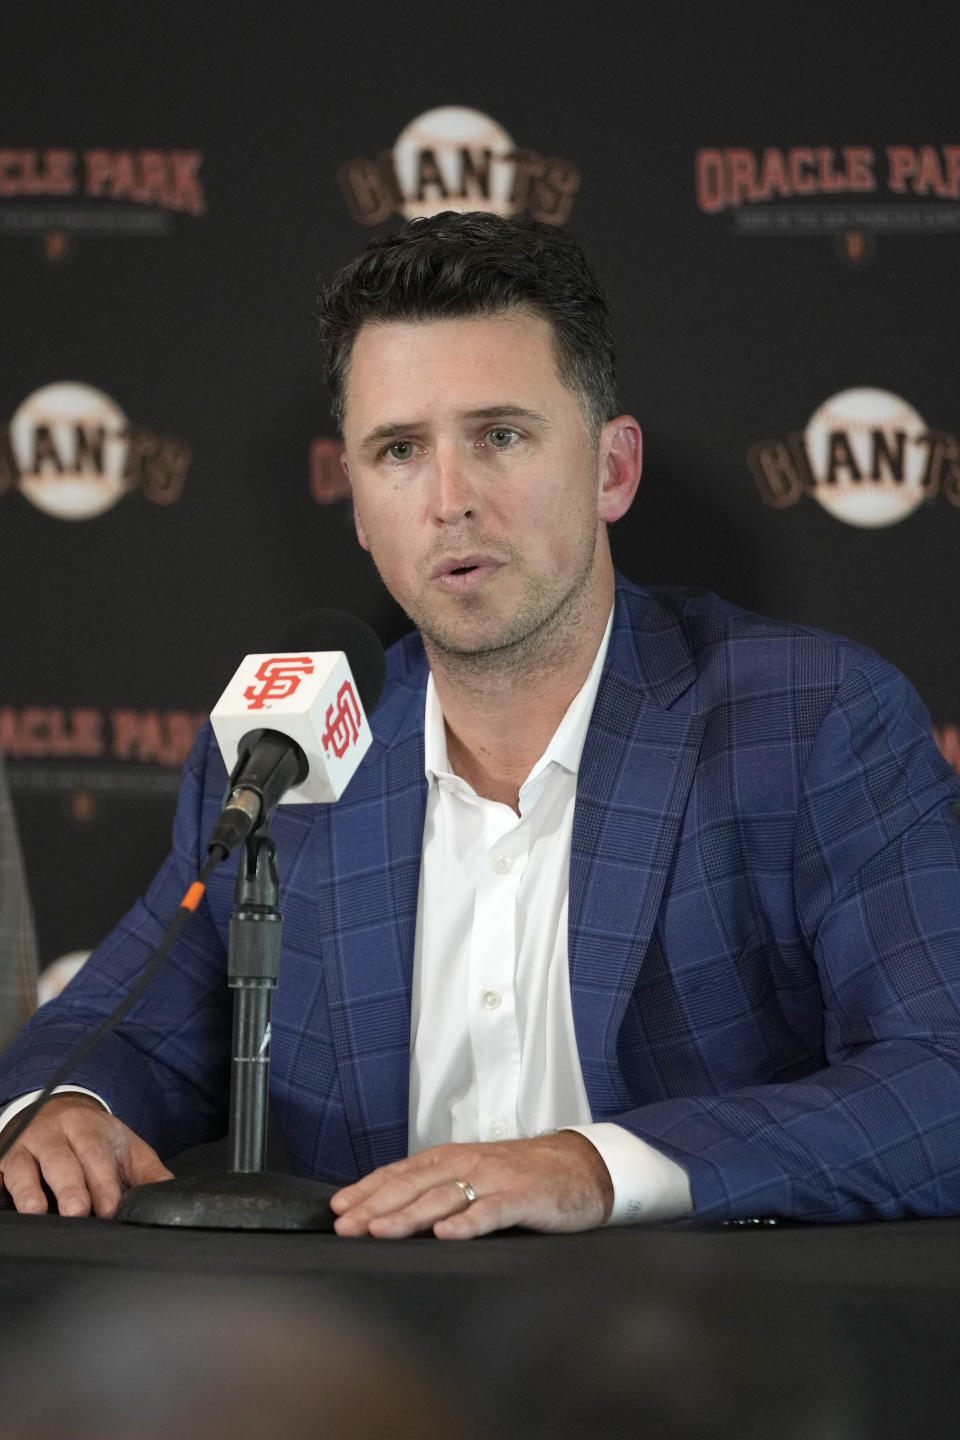 San Francisco Giants catcher Buster Posey talks during a news conference announcing his retirement from baseball, Thursday, Nov. 4, 2021, in San Francisco. (AP Photo/Tony Avelar)